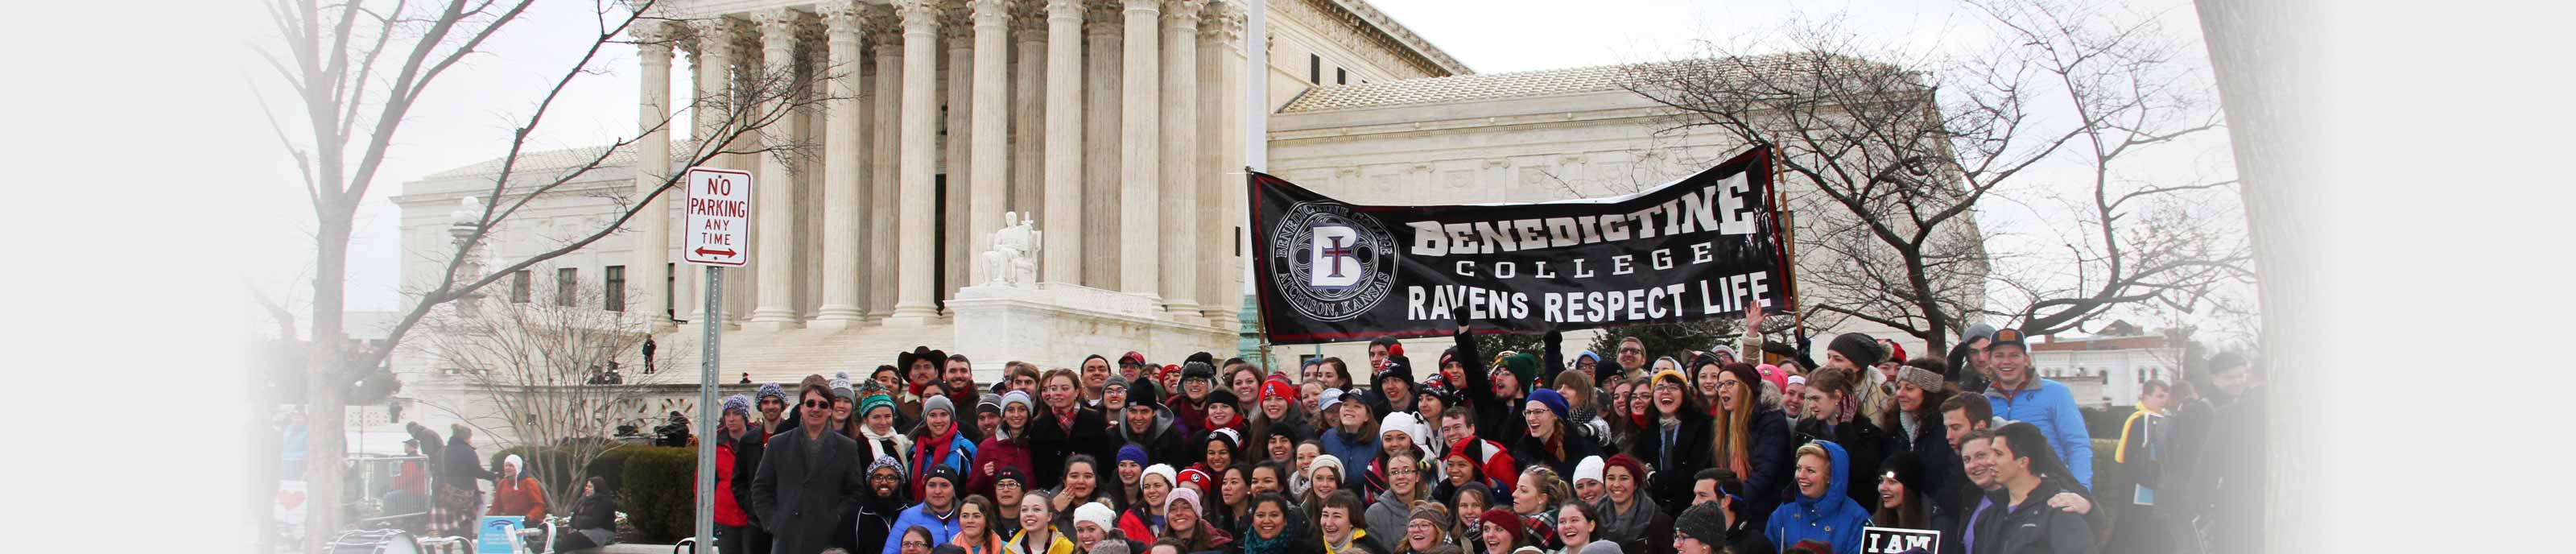 A crowd of Benedictine College students in front of the Supreme Court building in Washington, D.C. after the March for Life